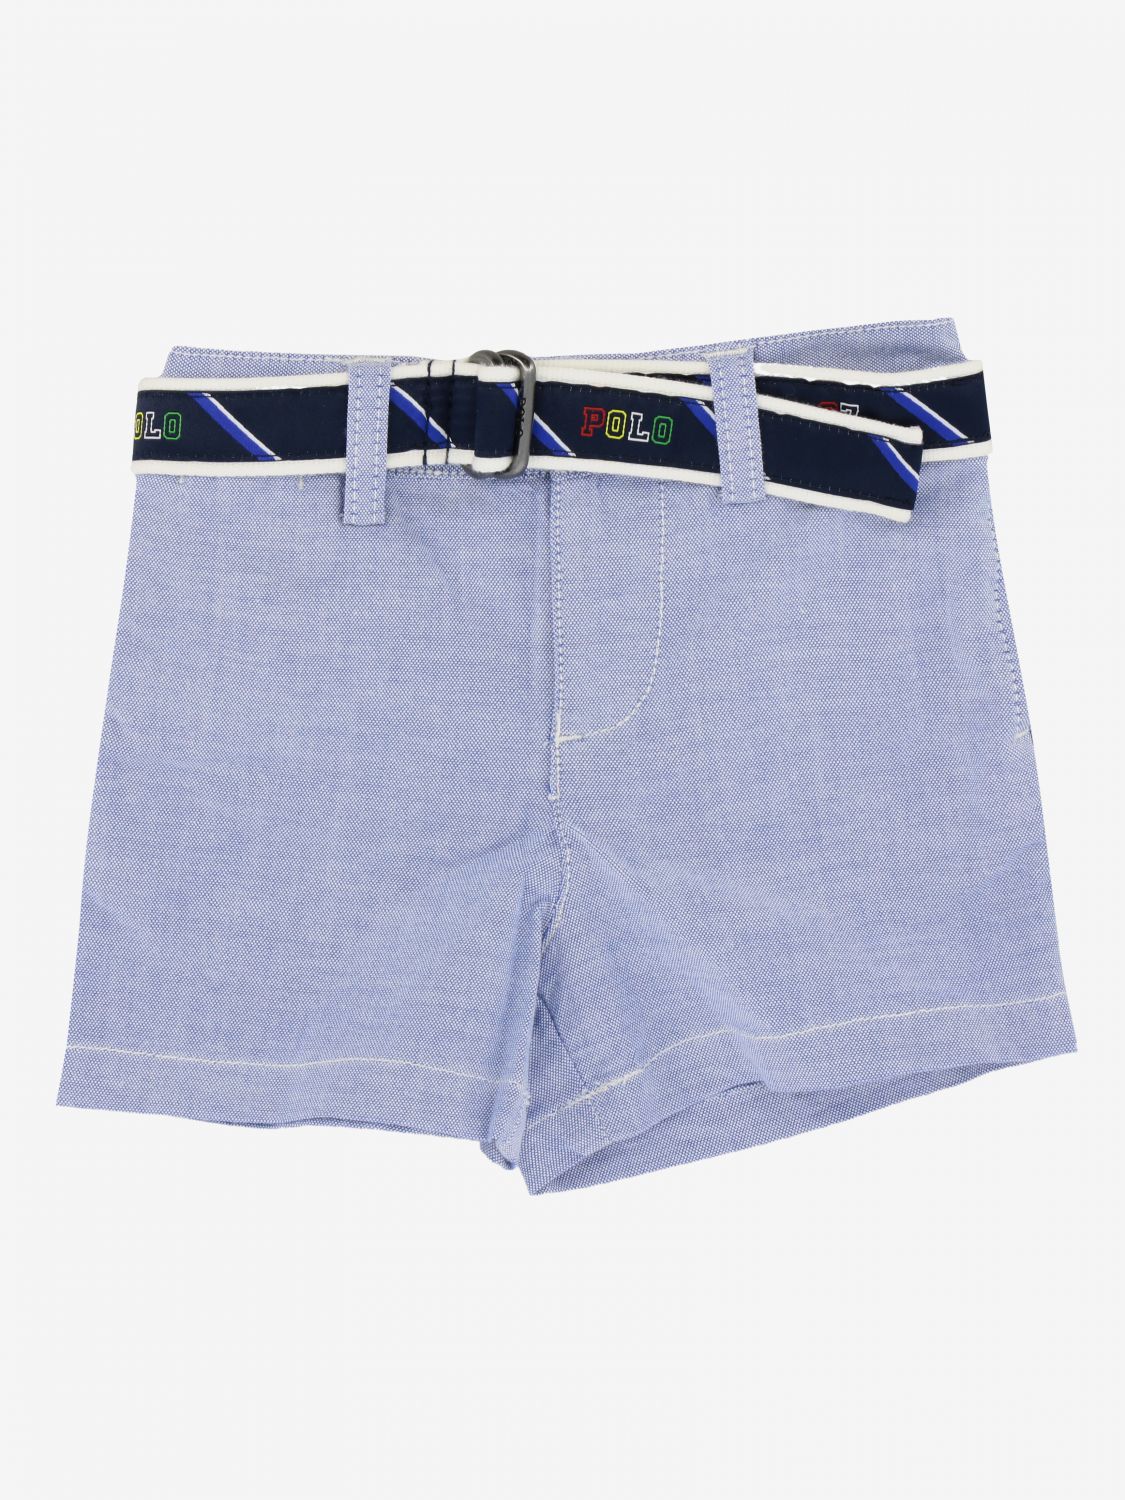 Polo Ralph Lauren Infant Outlet: shorts with belt - Gnawed Blue | Polo ...